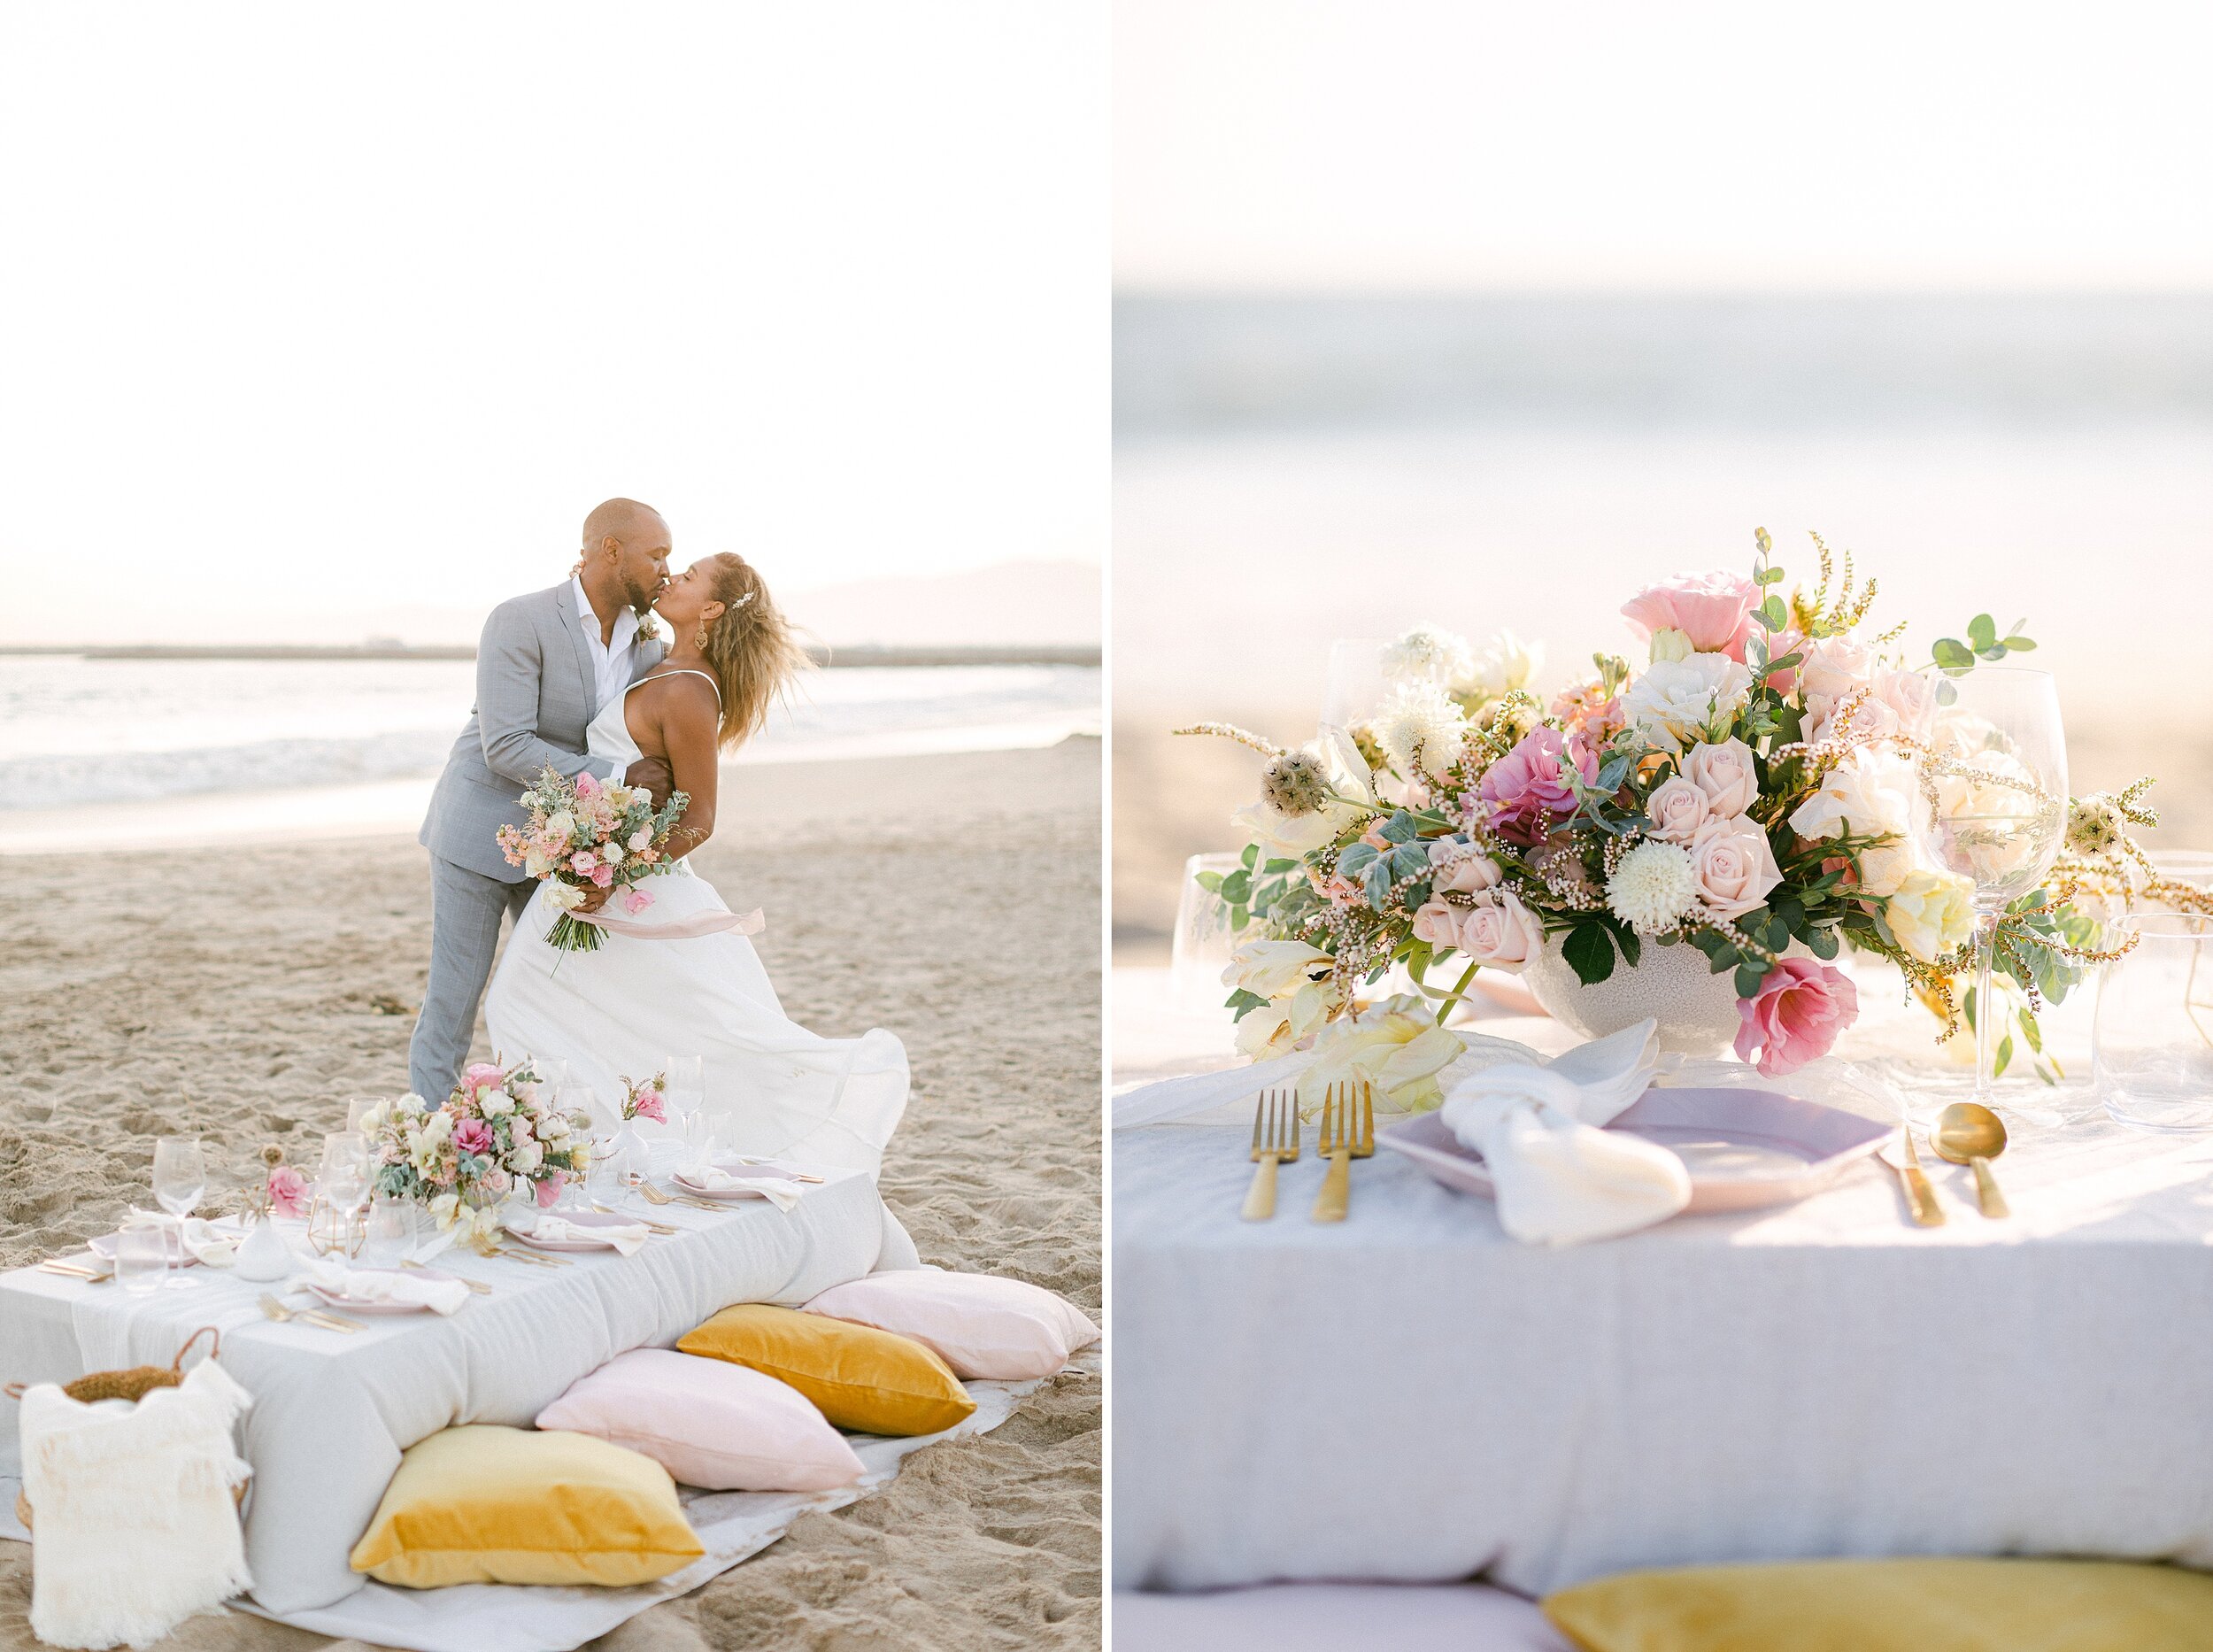 Bride and groom kiss, following their summertime beach elopement in Marina Del Rey, CA.